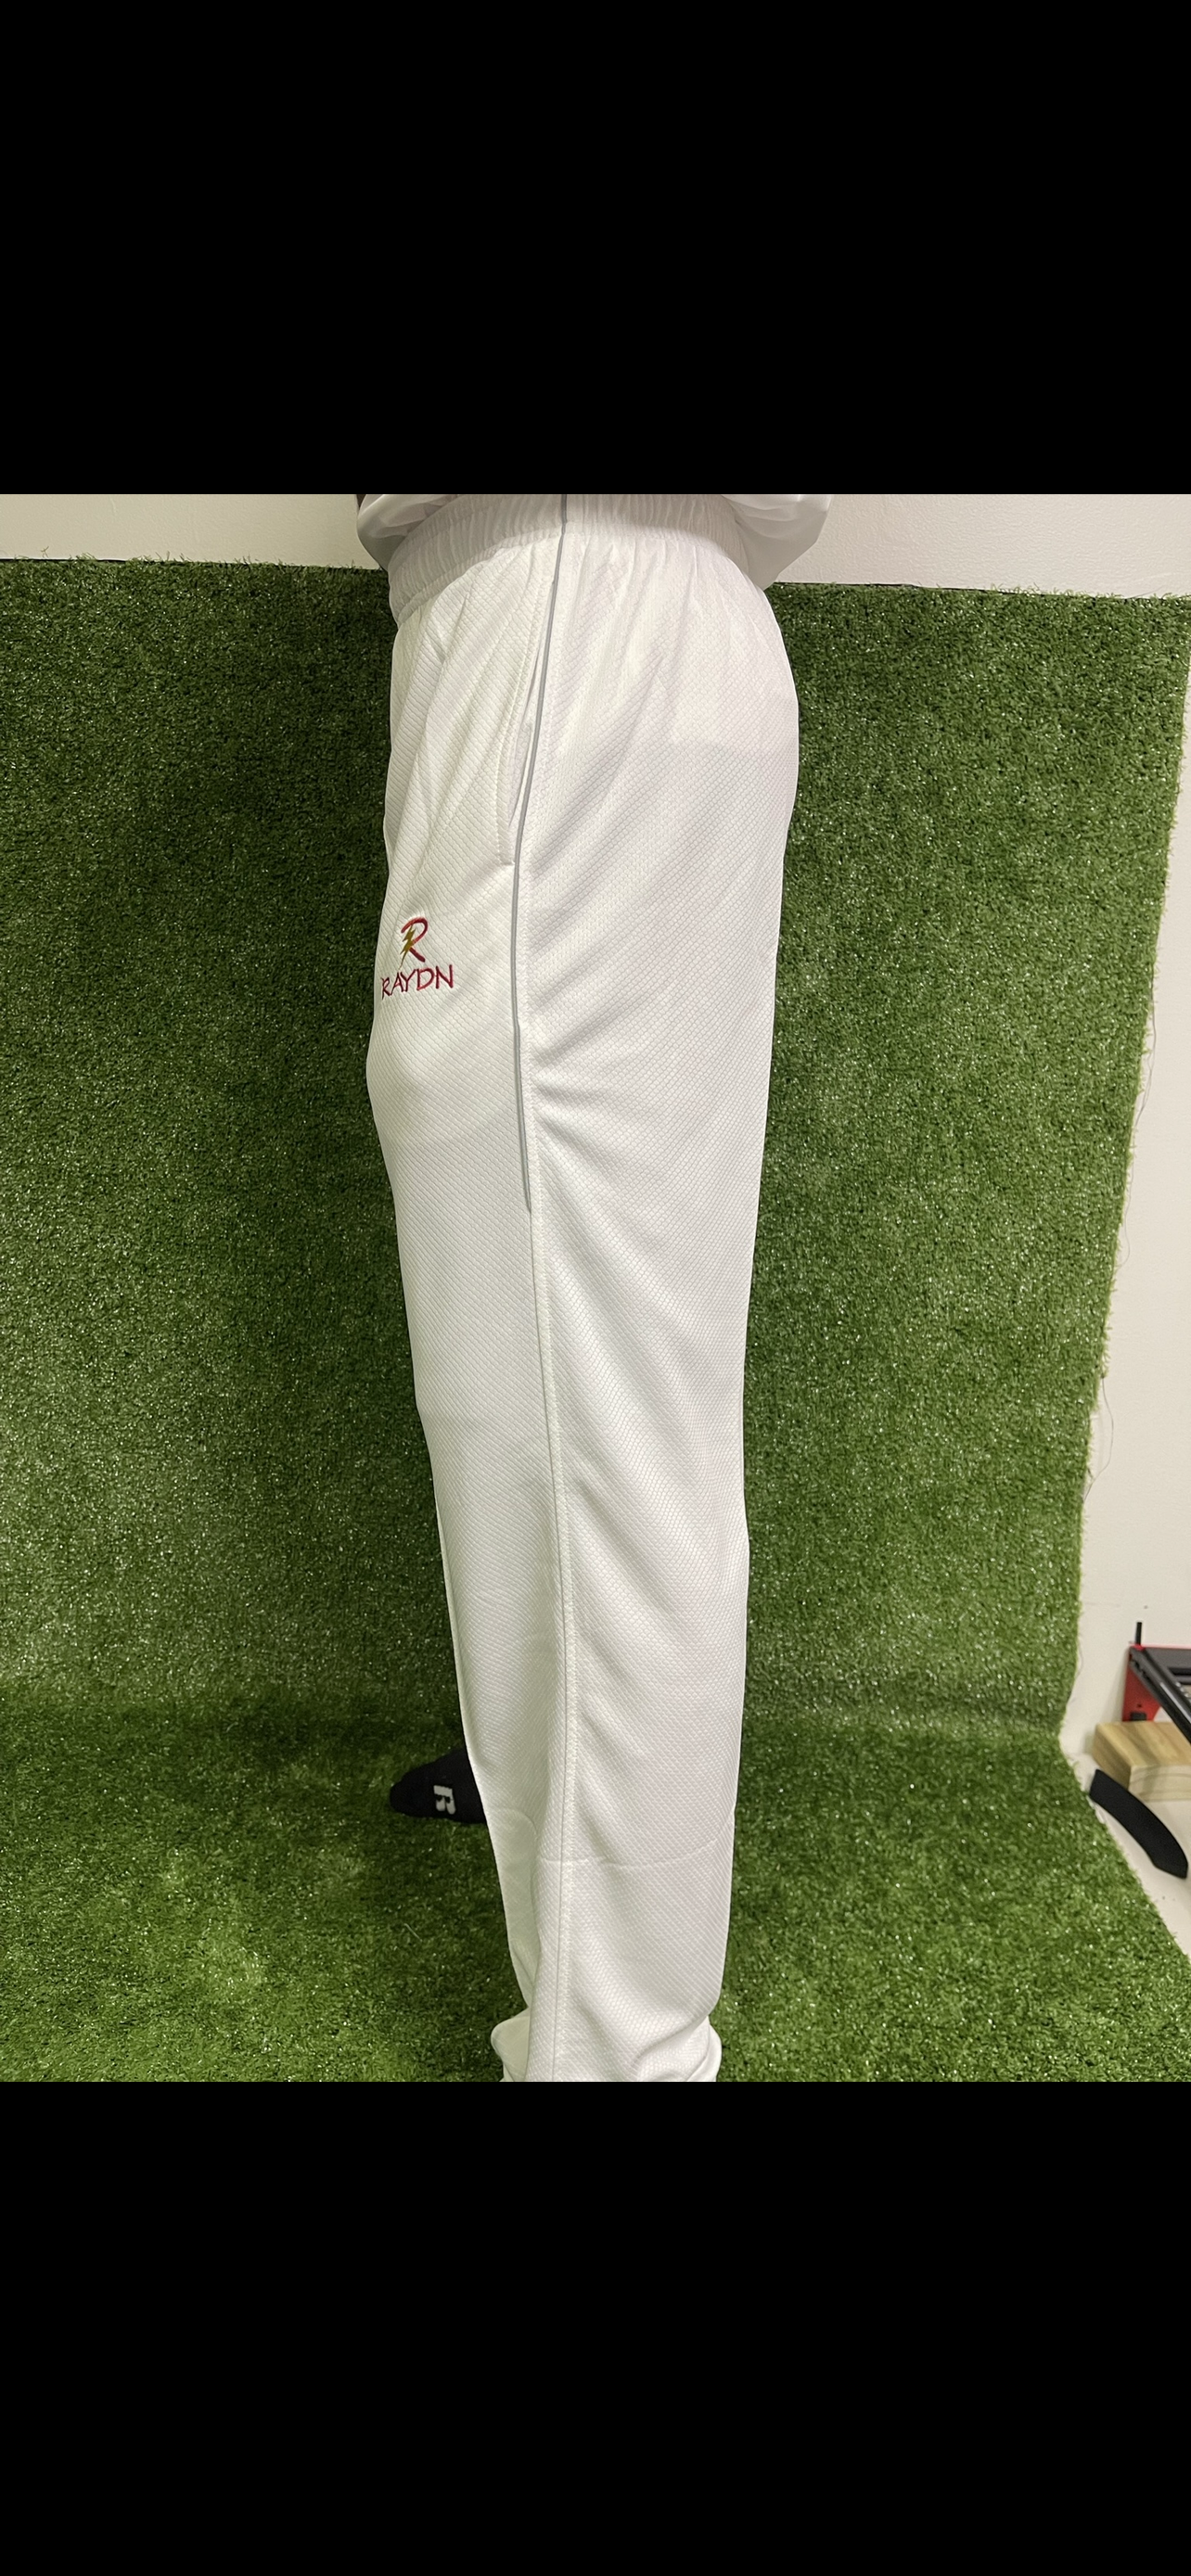 TK White Cricket Pant at Rs 600/piece in Mumbai | ID: 14713955548